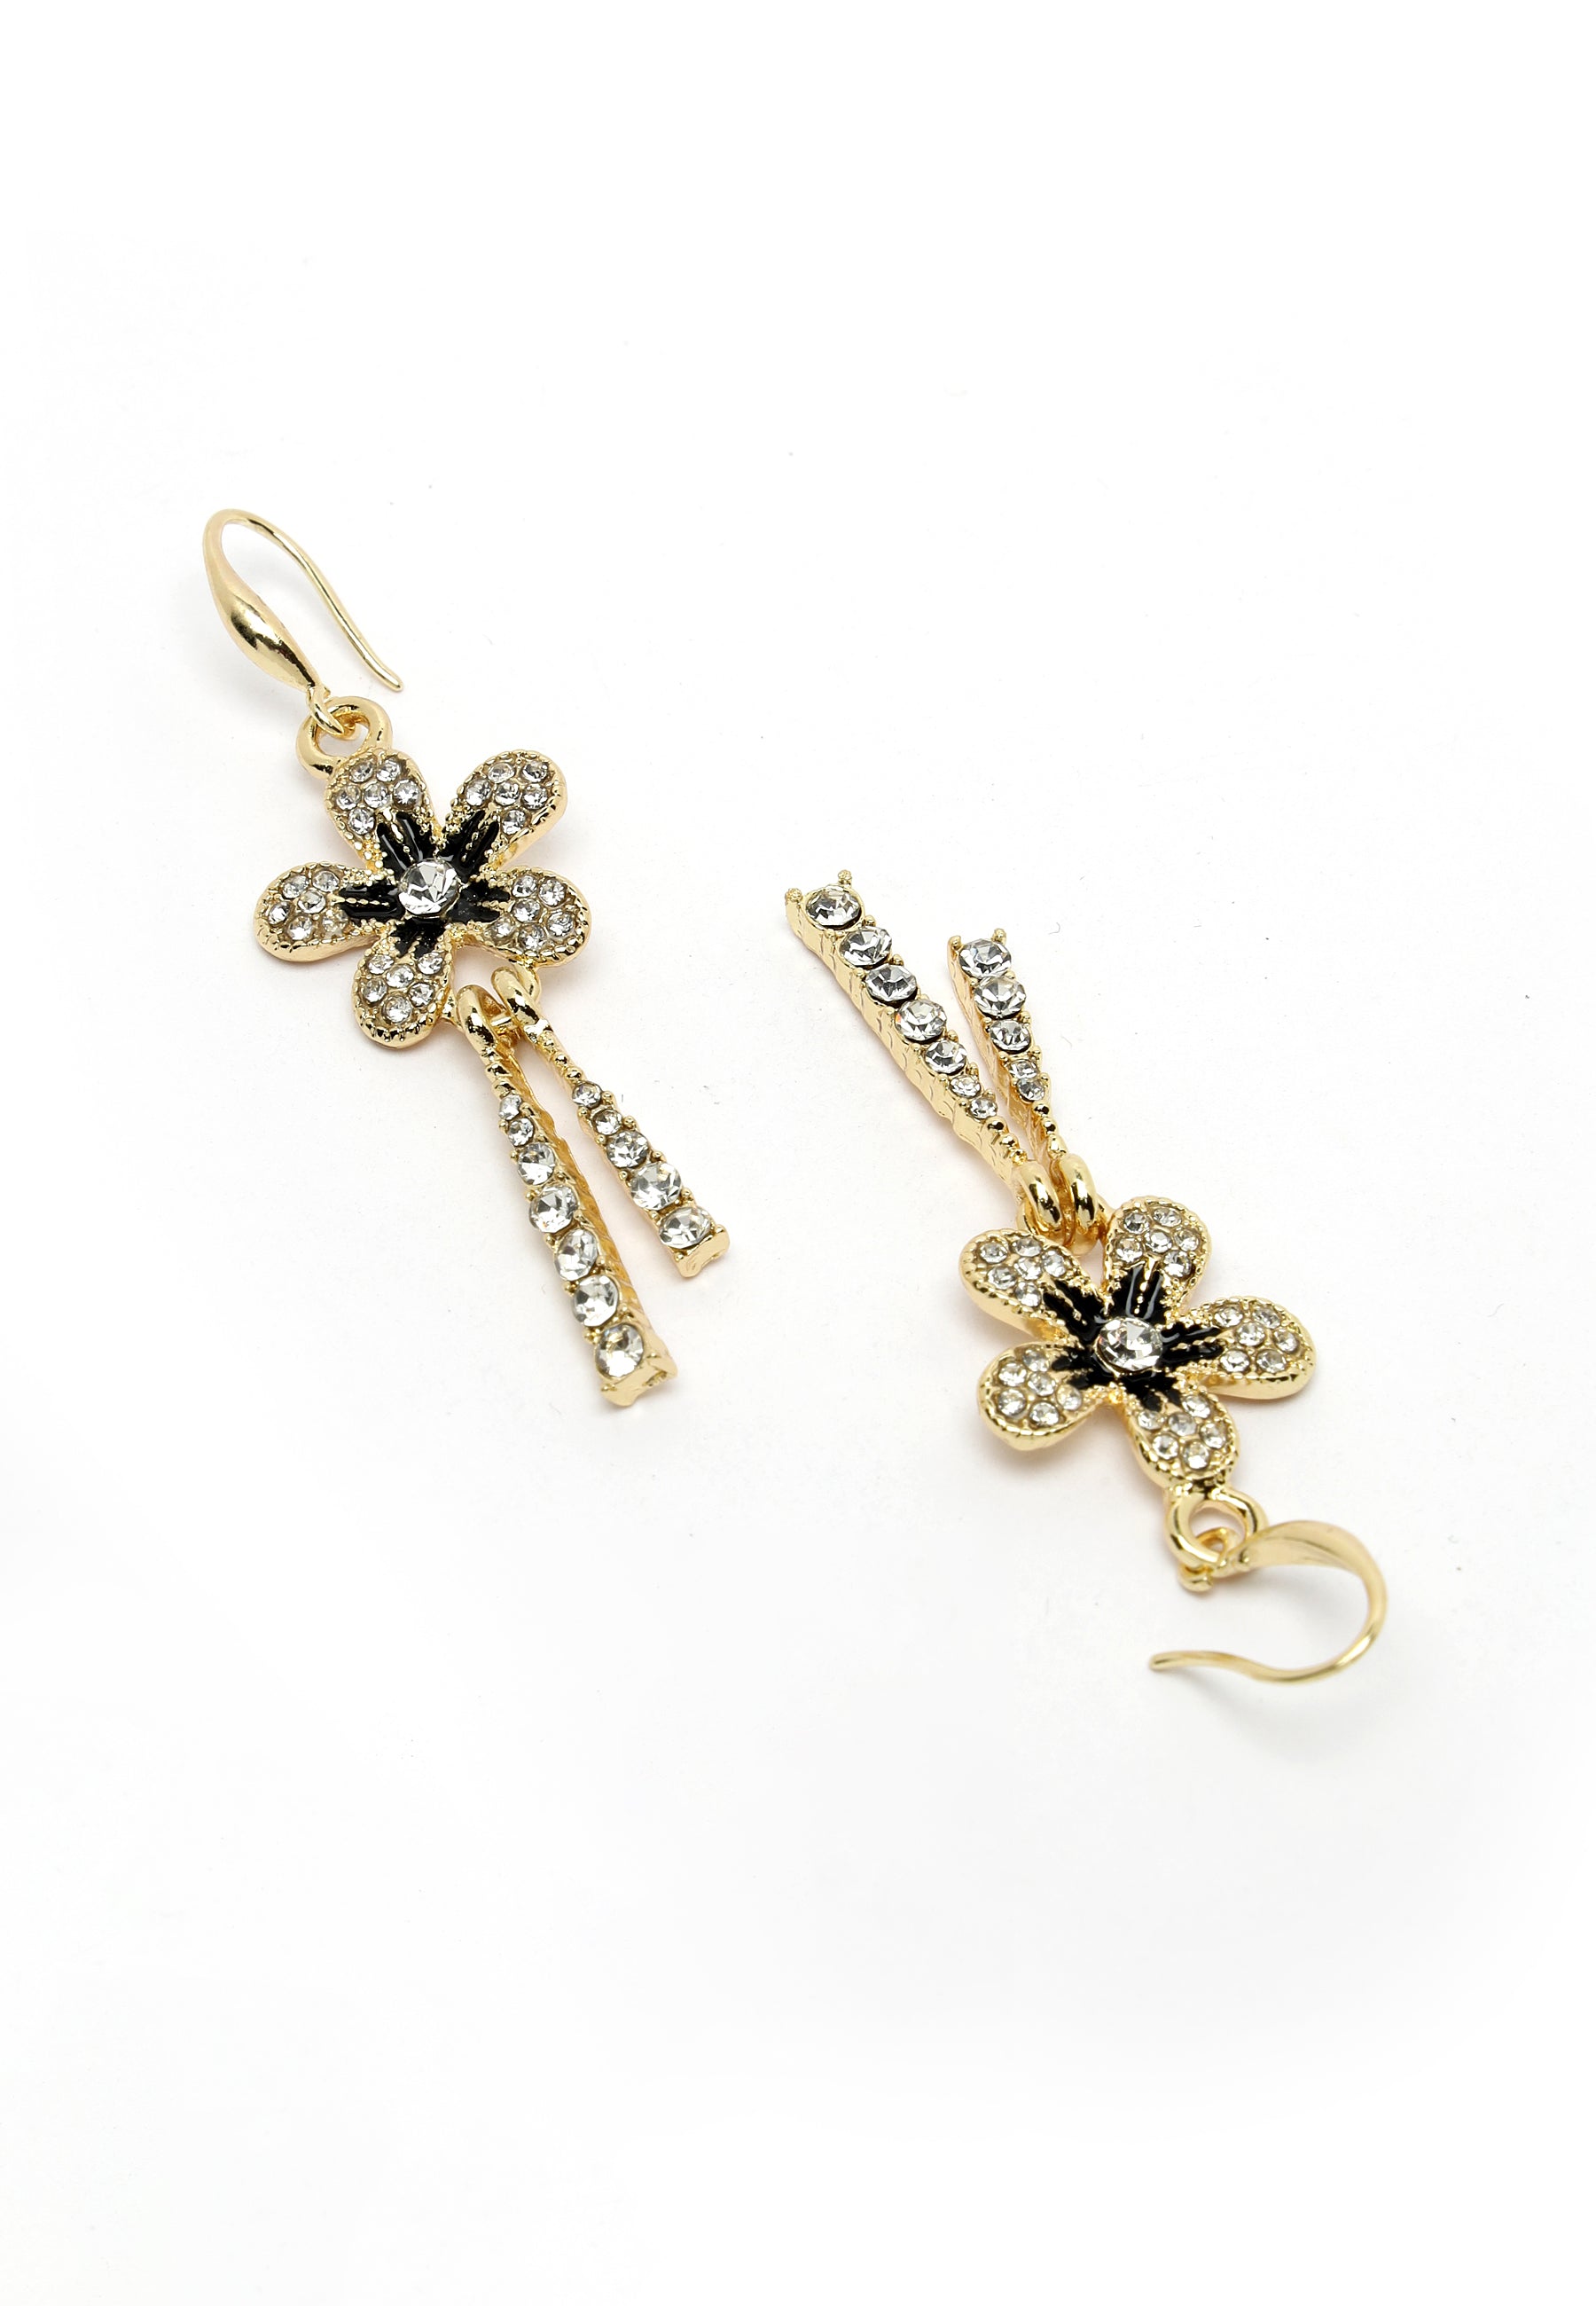 Avant-Garde Paris Gold-Colored Crystal Floral Chimes Earrings